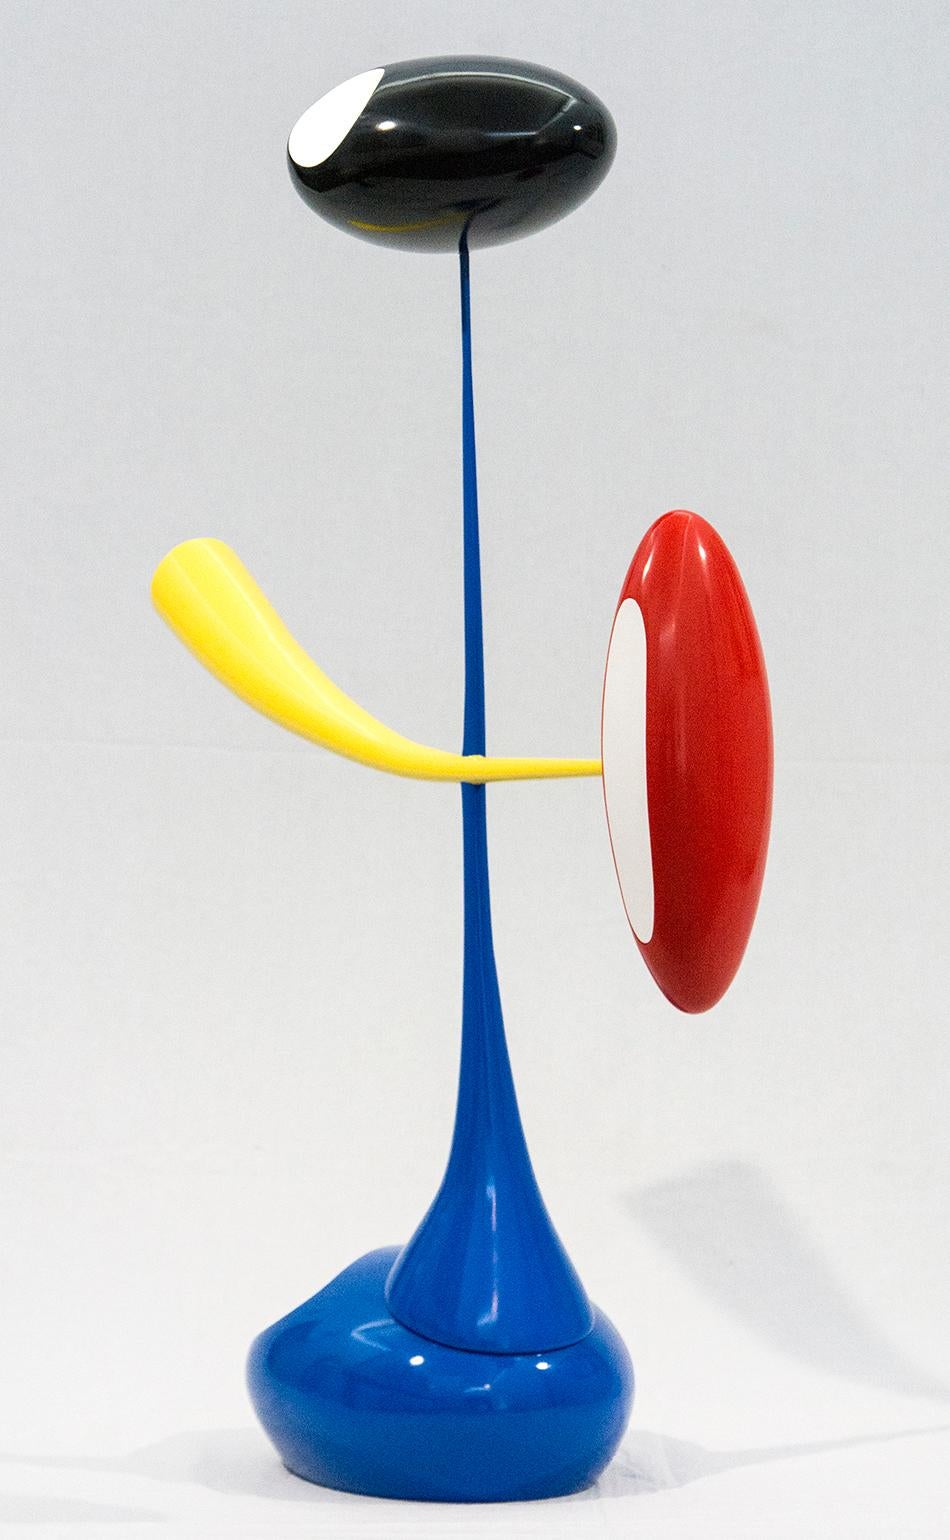 Performance - abstract interior red, blue, yellow and black playful sculpture - Sculpture by Benny Katz